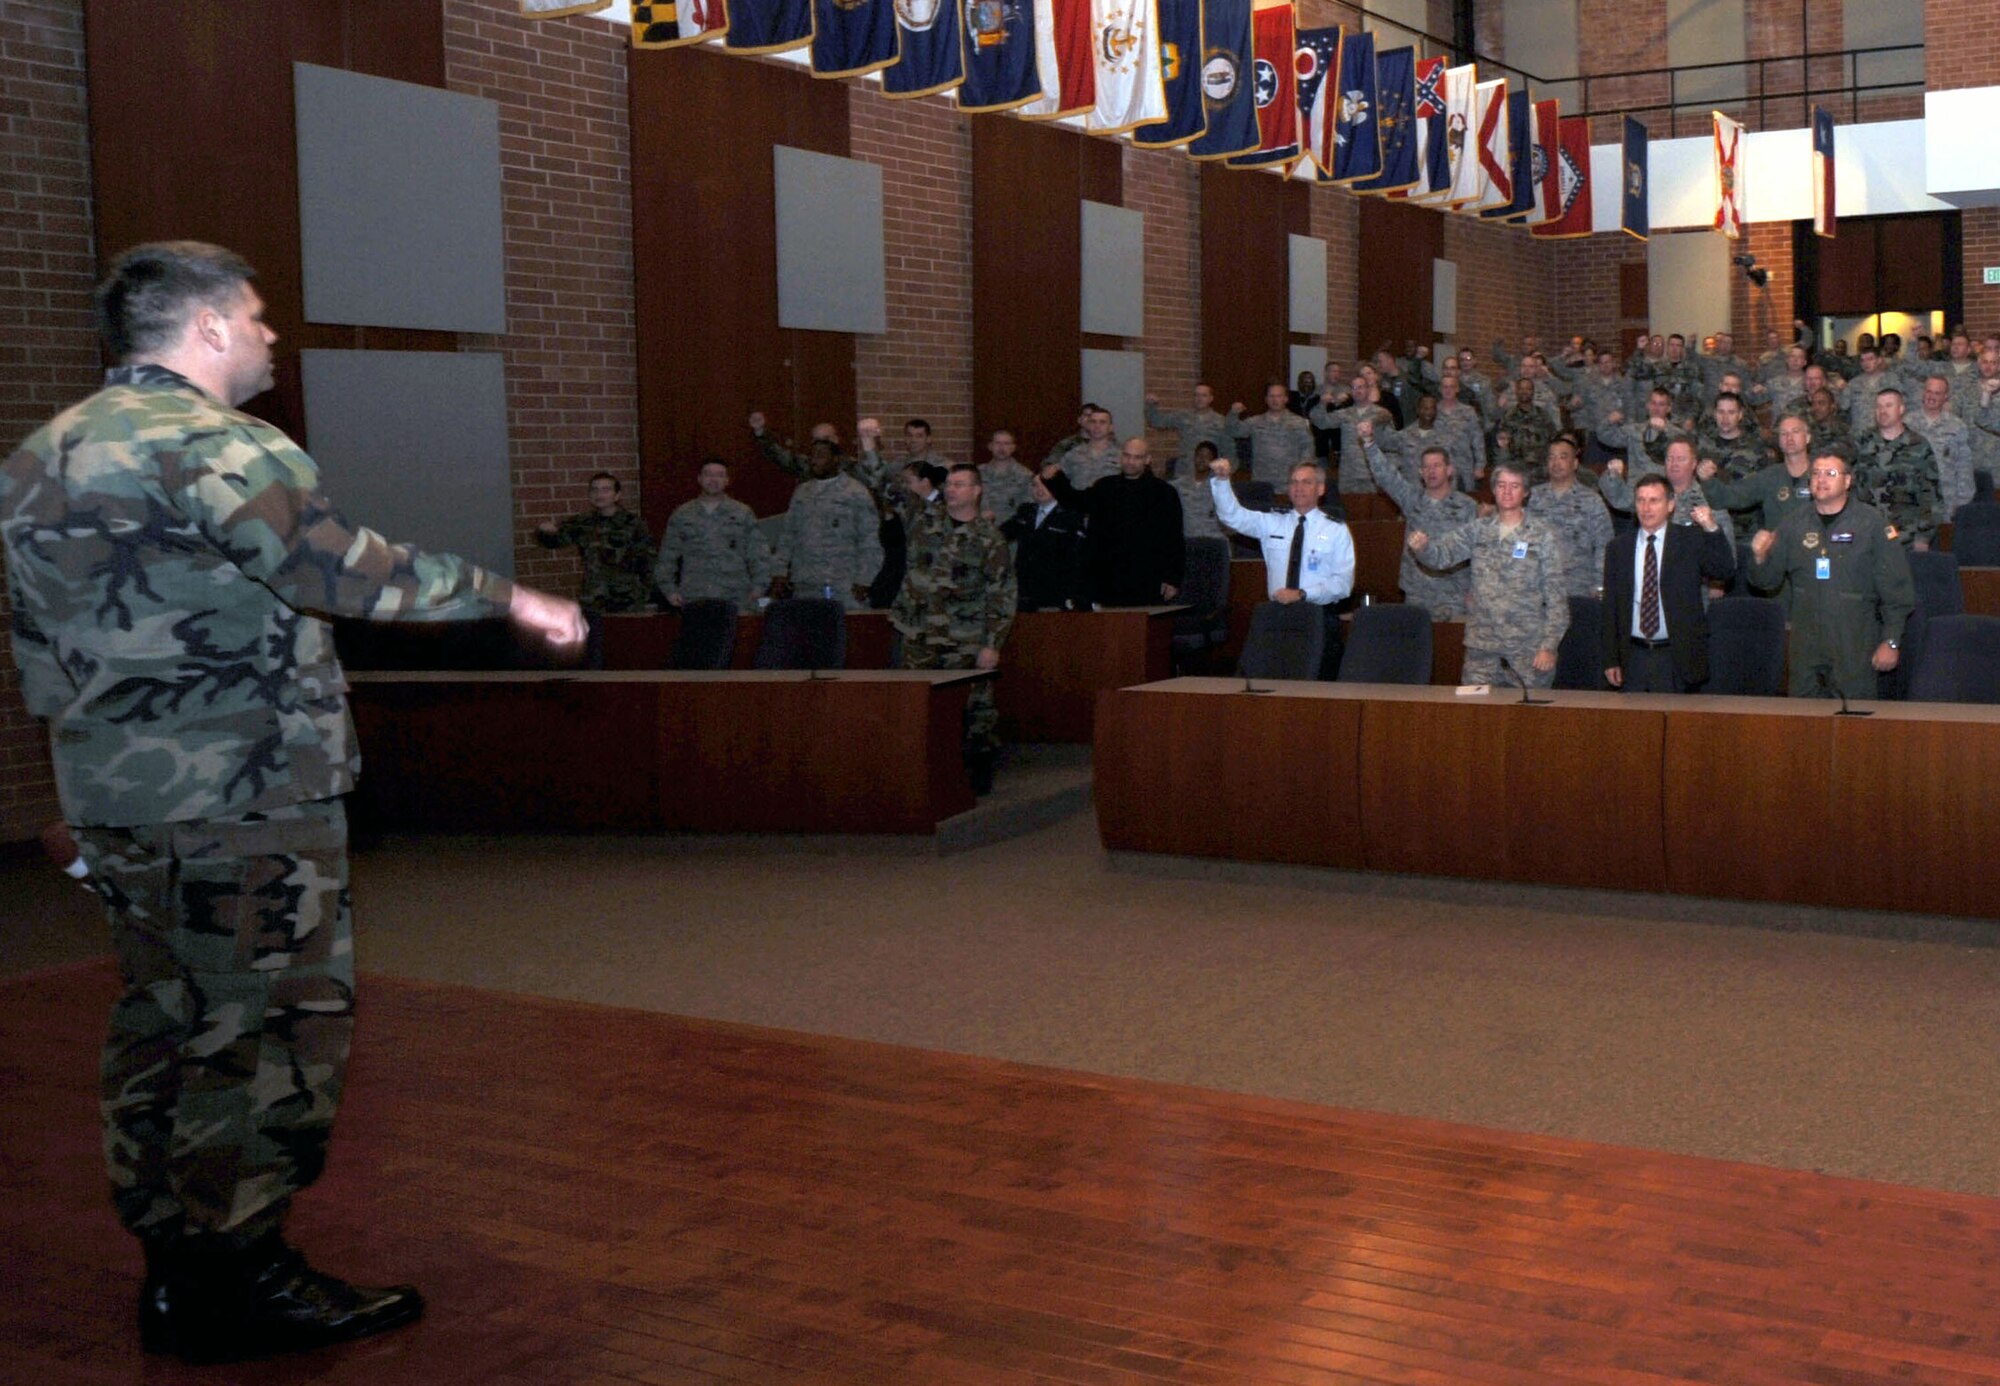 Col. Greg Otey, U.S. Air Force Expeditionary Center vice commander, leads the EC "Eagles" in a battle cry of "We are...Eagles" during Wingman Day activities on Fort Dix, N.J., Nov. 26, 2008.  All members of the Expeditionary Center gathered that day to celebrate and learn from their fellow wingmen.  (U.S. Air Force Photo/Staff Sgt. Nathan Bevier)